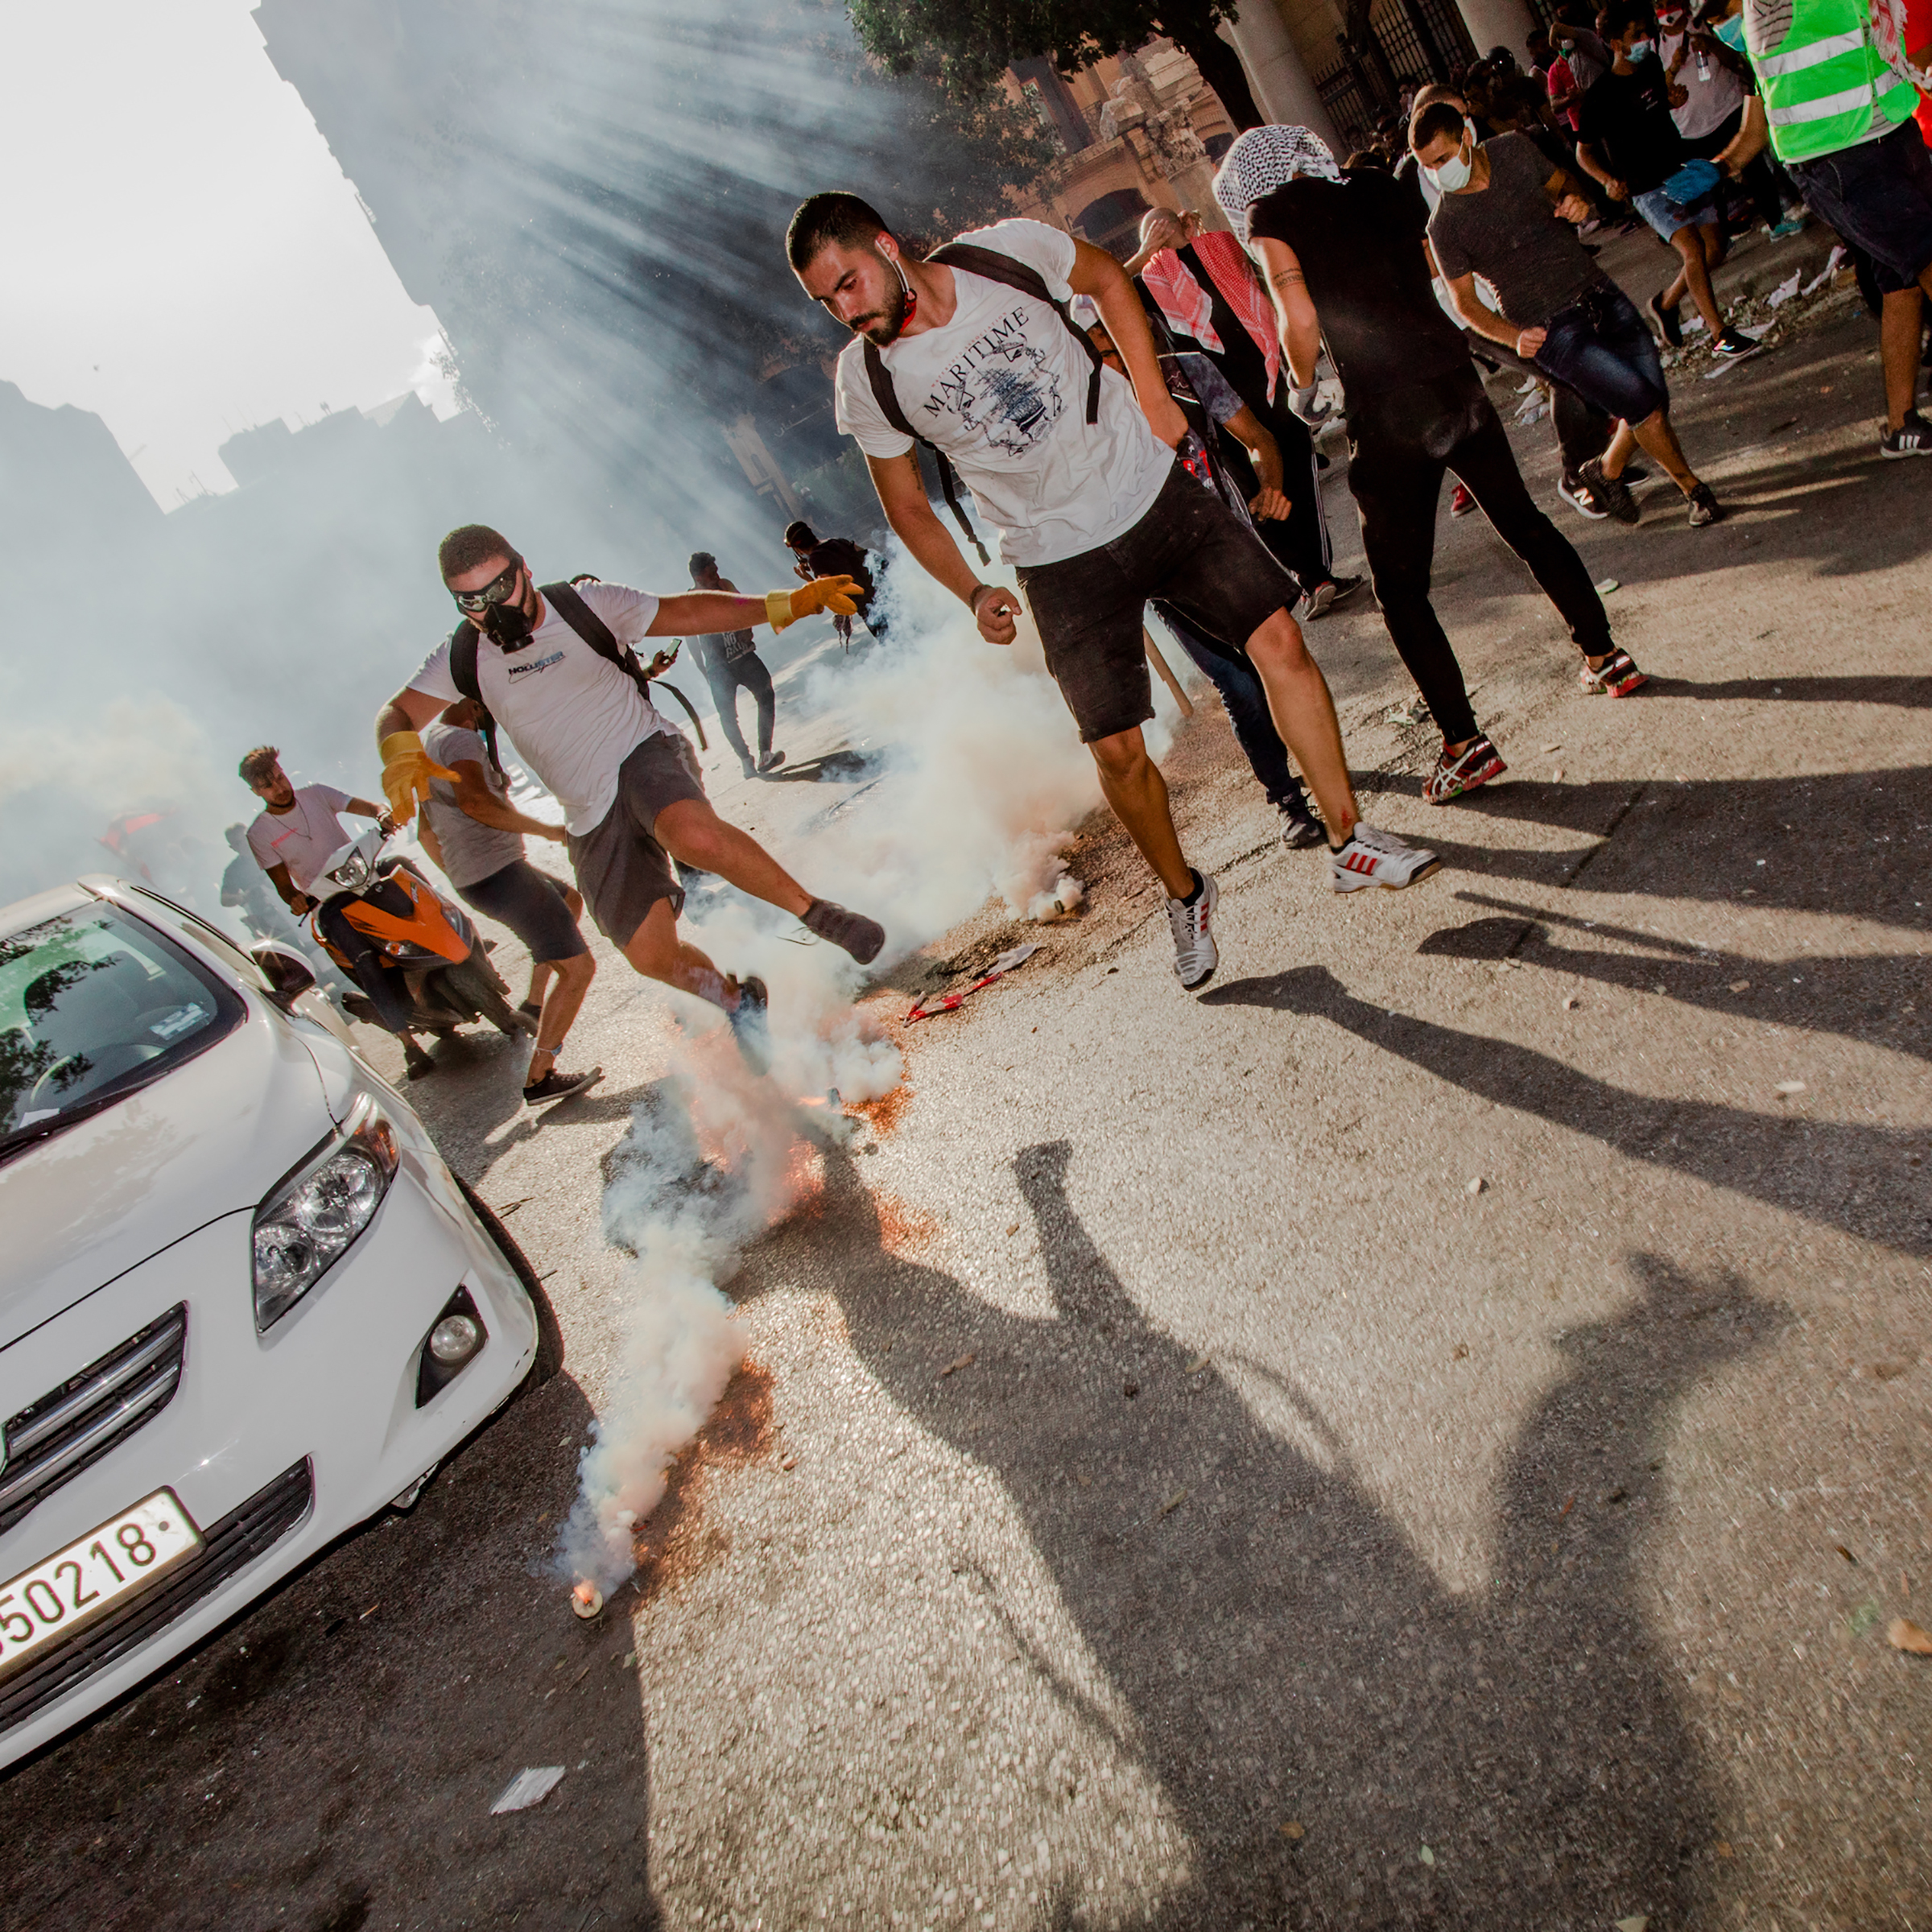 Smoke billows from a tear gas canister during an antigovernment demonstration in Beirut on Aug. 8, four days after the blast. (Myriam Boulos for TIME)